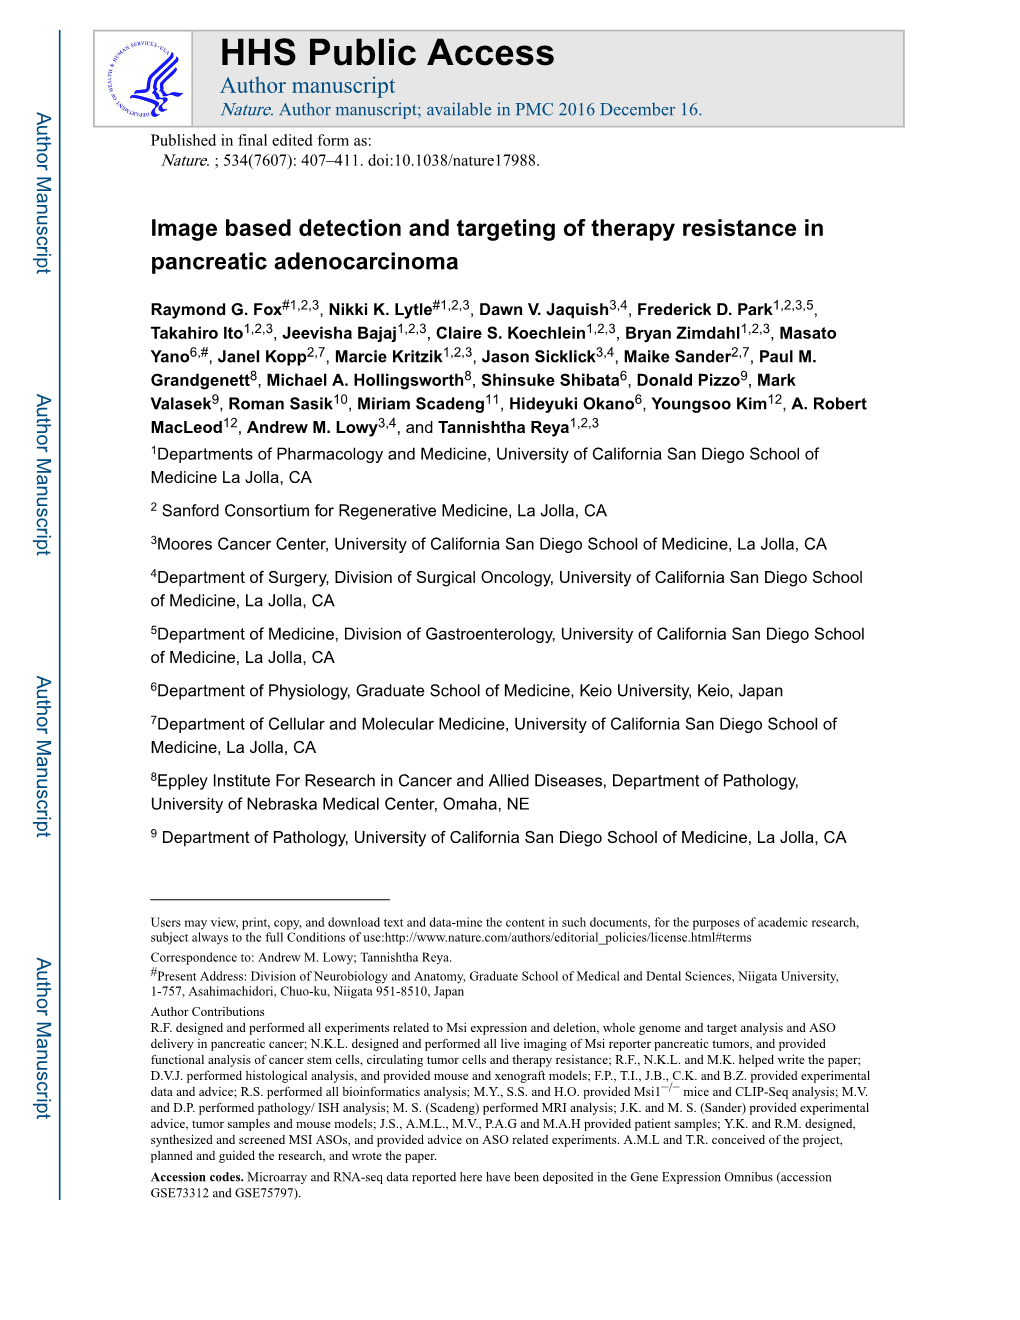 Image Based Detection and Targeting of Therapy Resistance in Pancreatic Adenocarcinoma